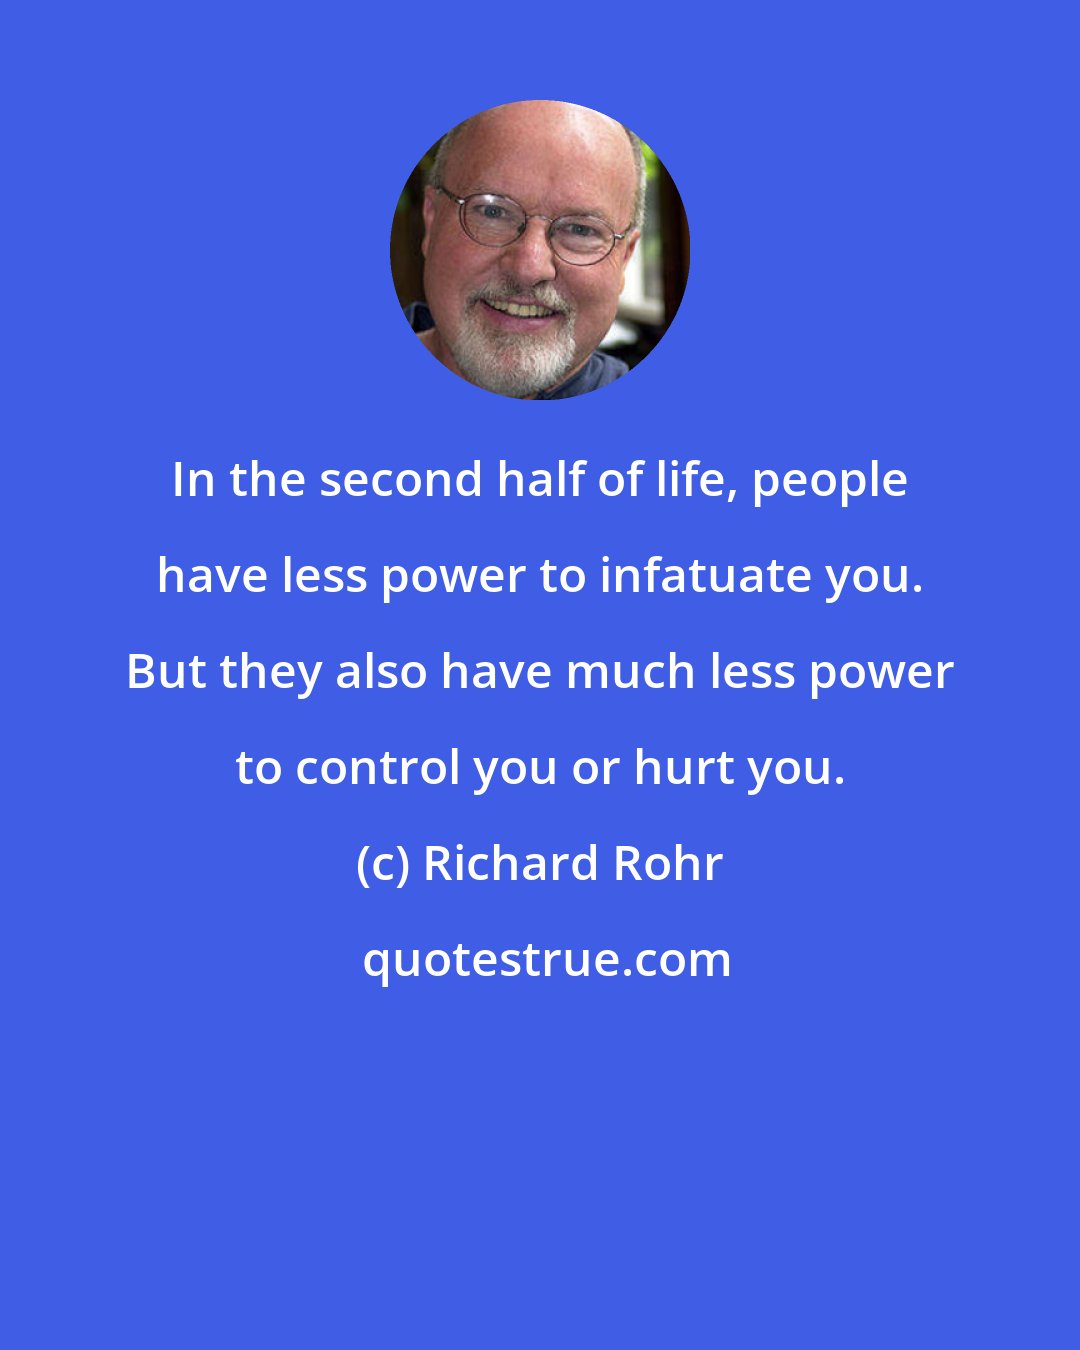 Richard Rohr: In the second half of life, people have less power to infatuate you. But they also have much less power to control you or hurt you.